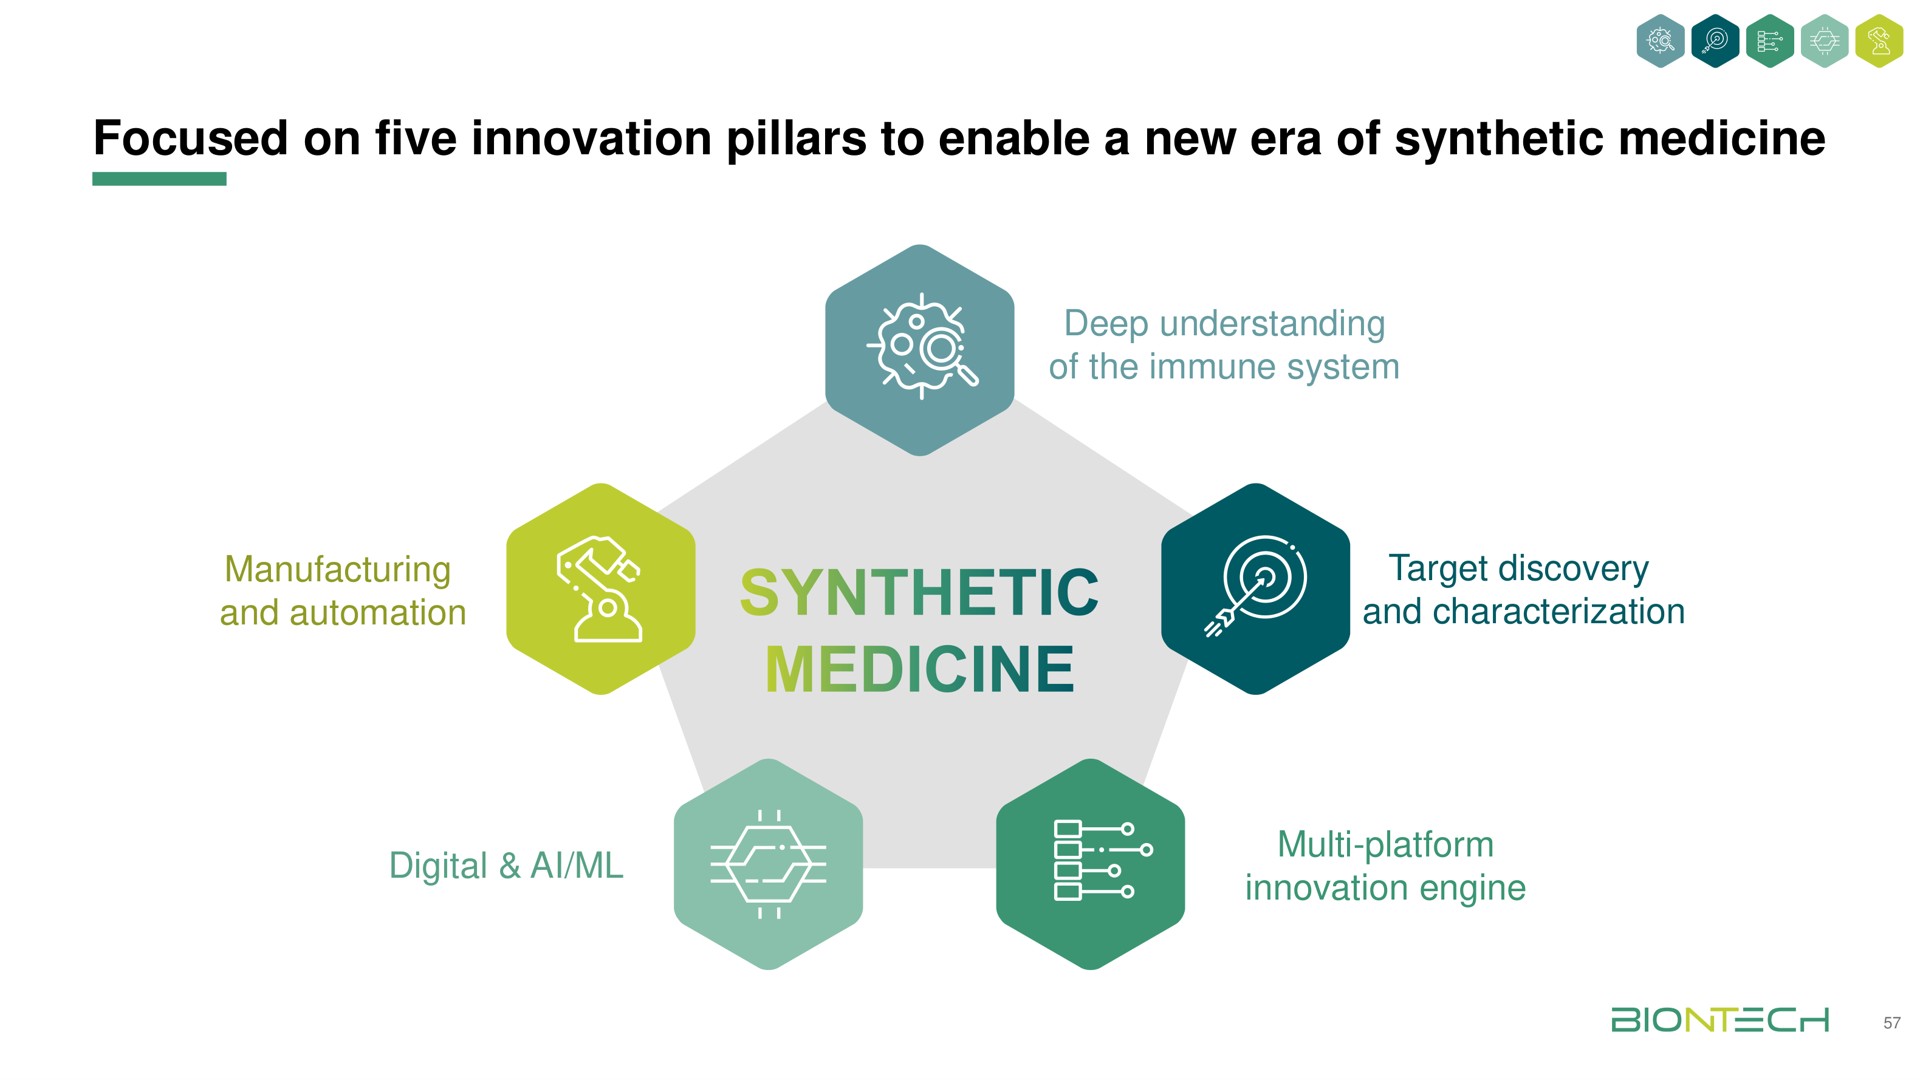 focused on five innovation pillars to enable a new era of synthetic medicine | BioNTech